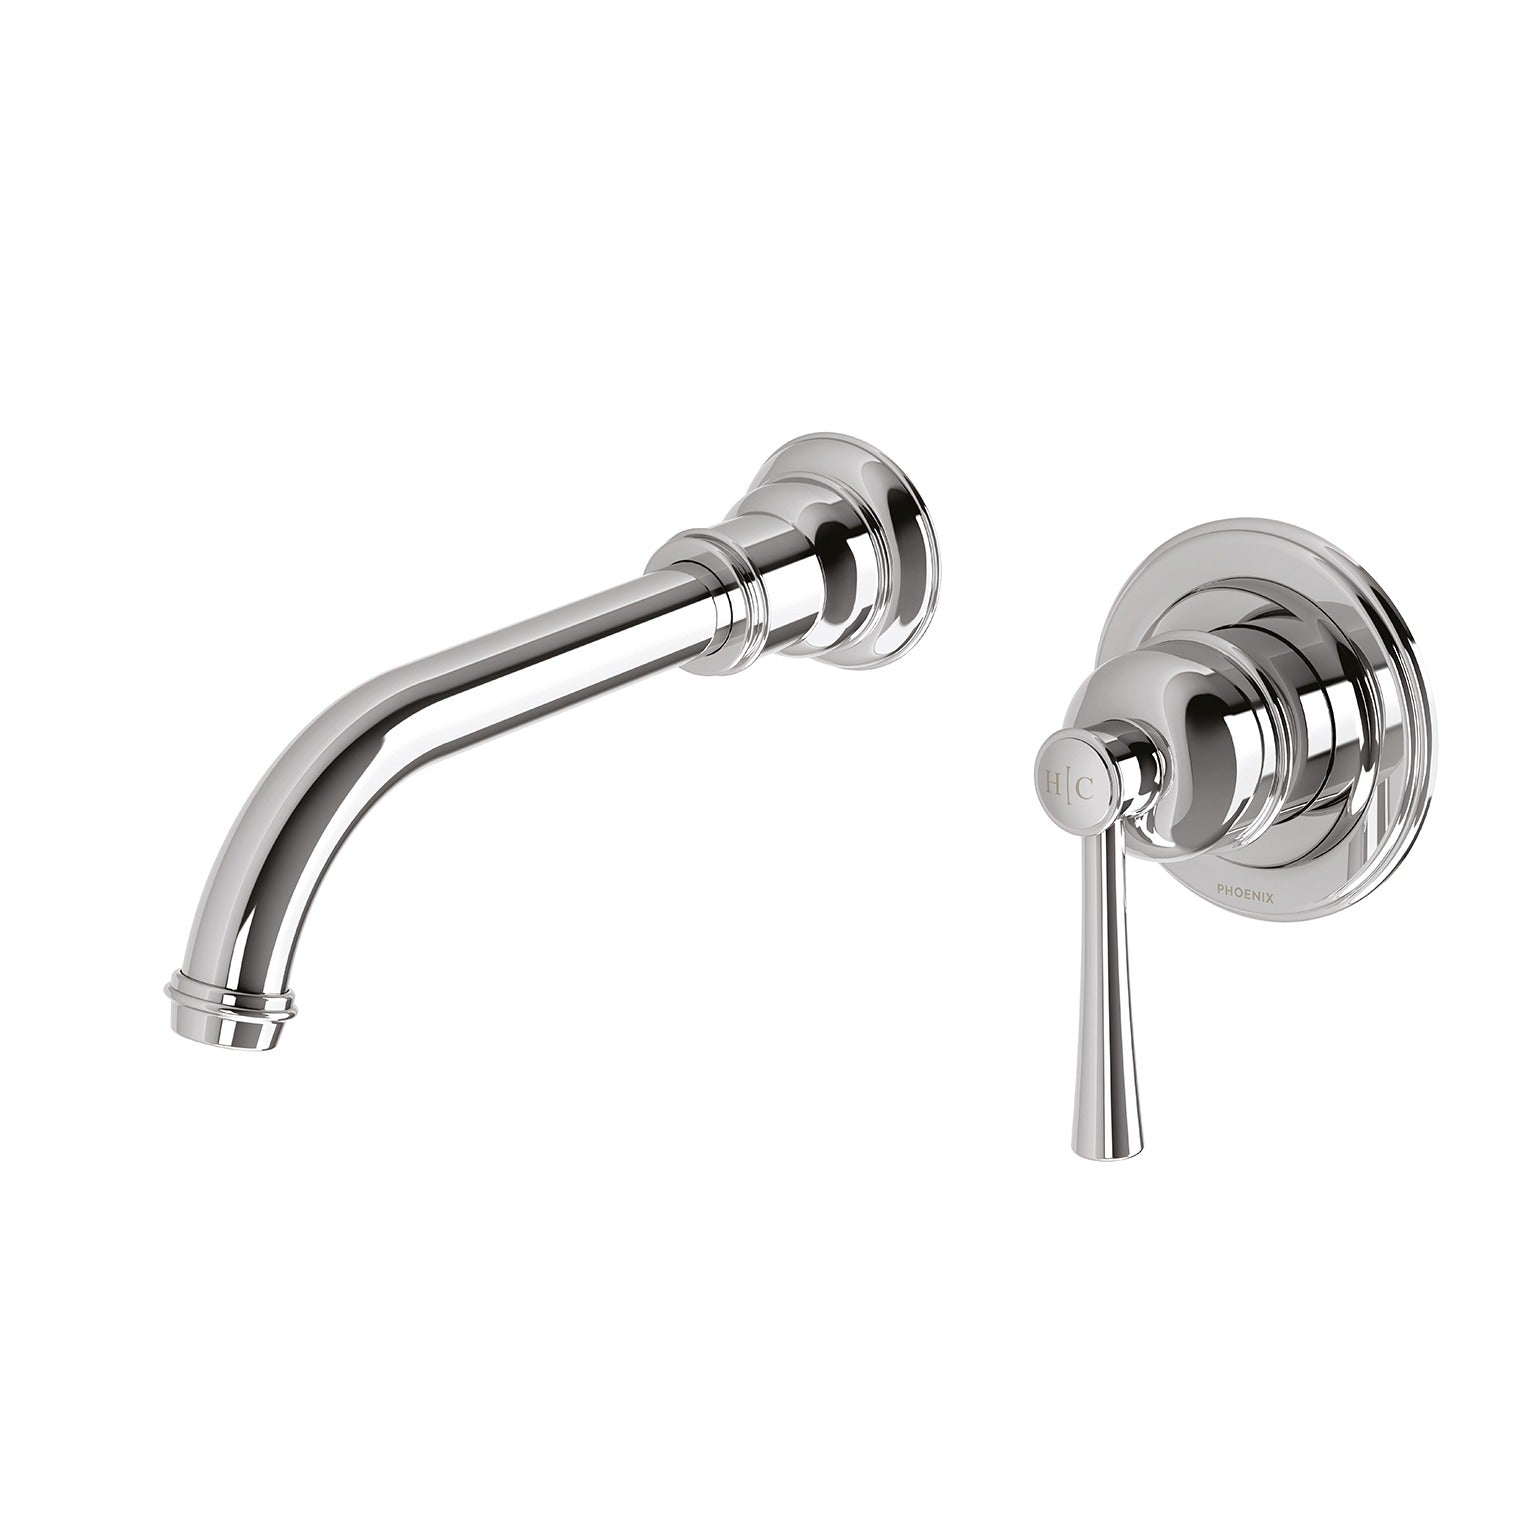 PHOENIX CROMFORD SWITCHMIX WALL BASIN MIXER SET FIT-OFF AND ROUGH-IN KIT 200MM CHROME